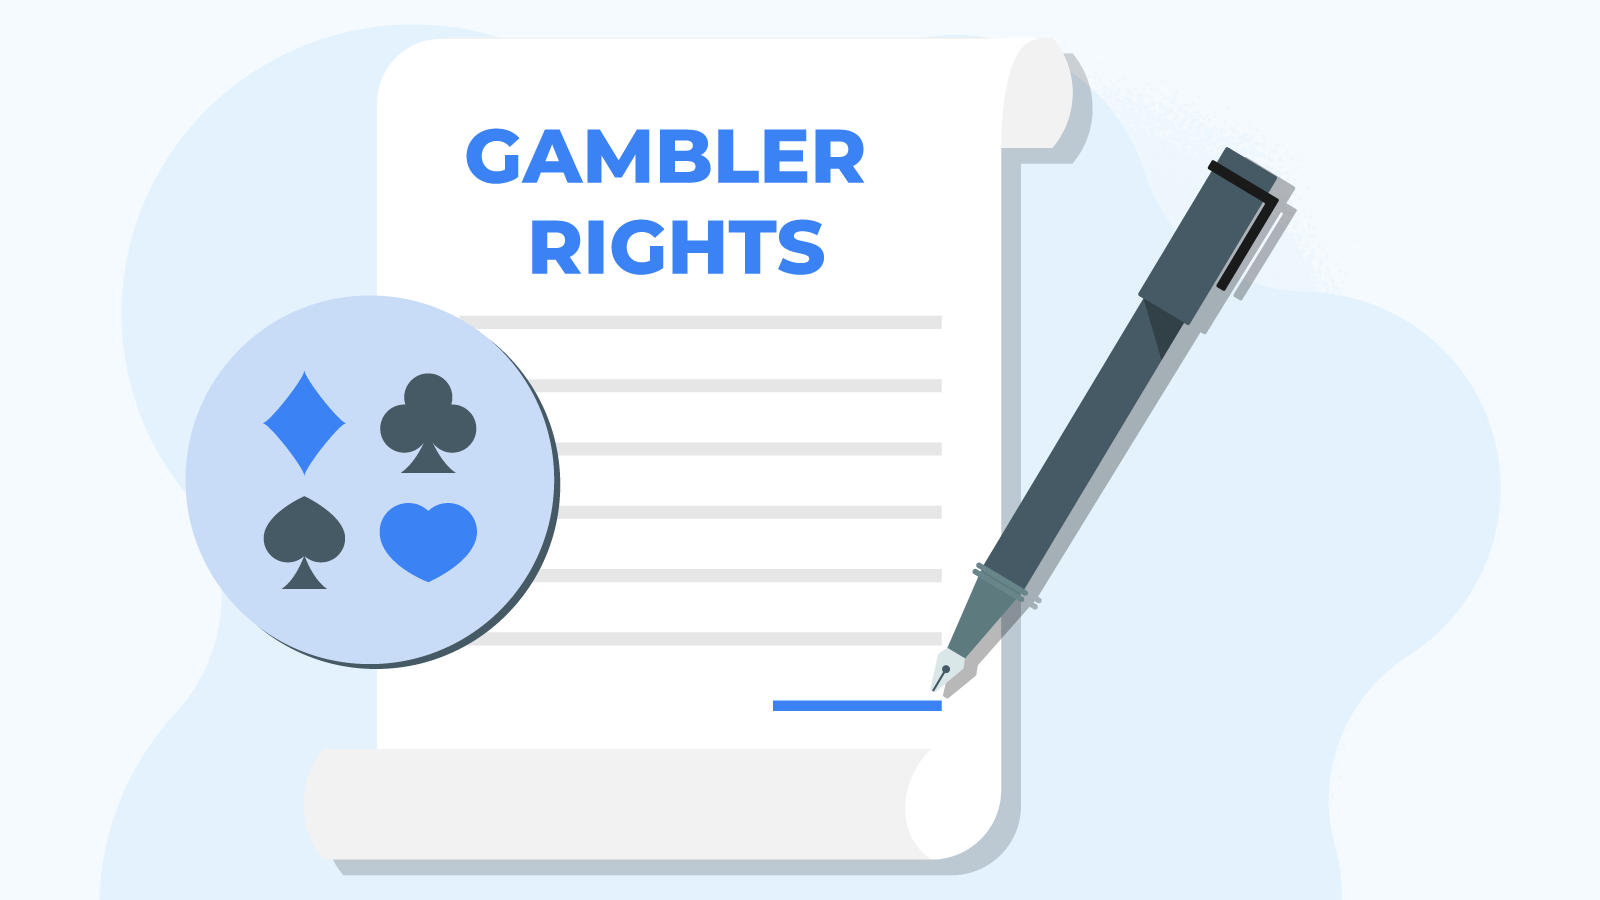 The rights NZ gamblers are entitled to